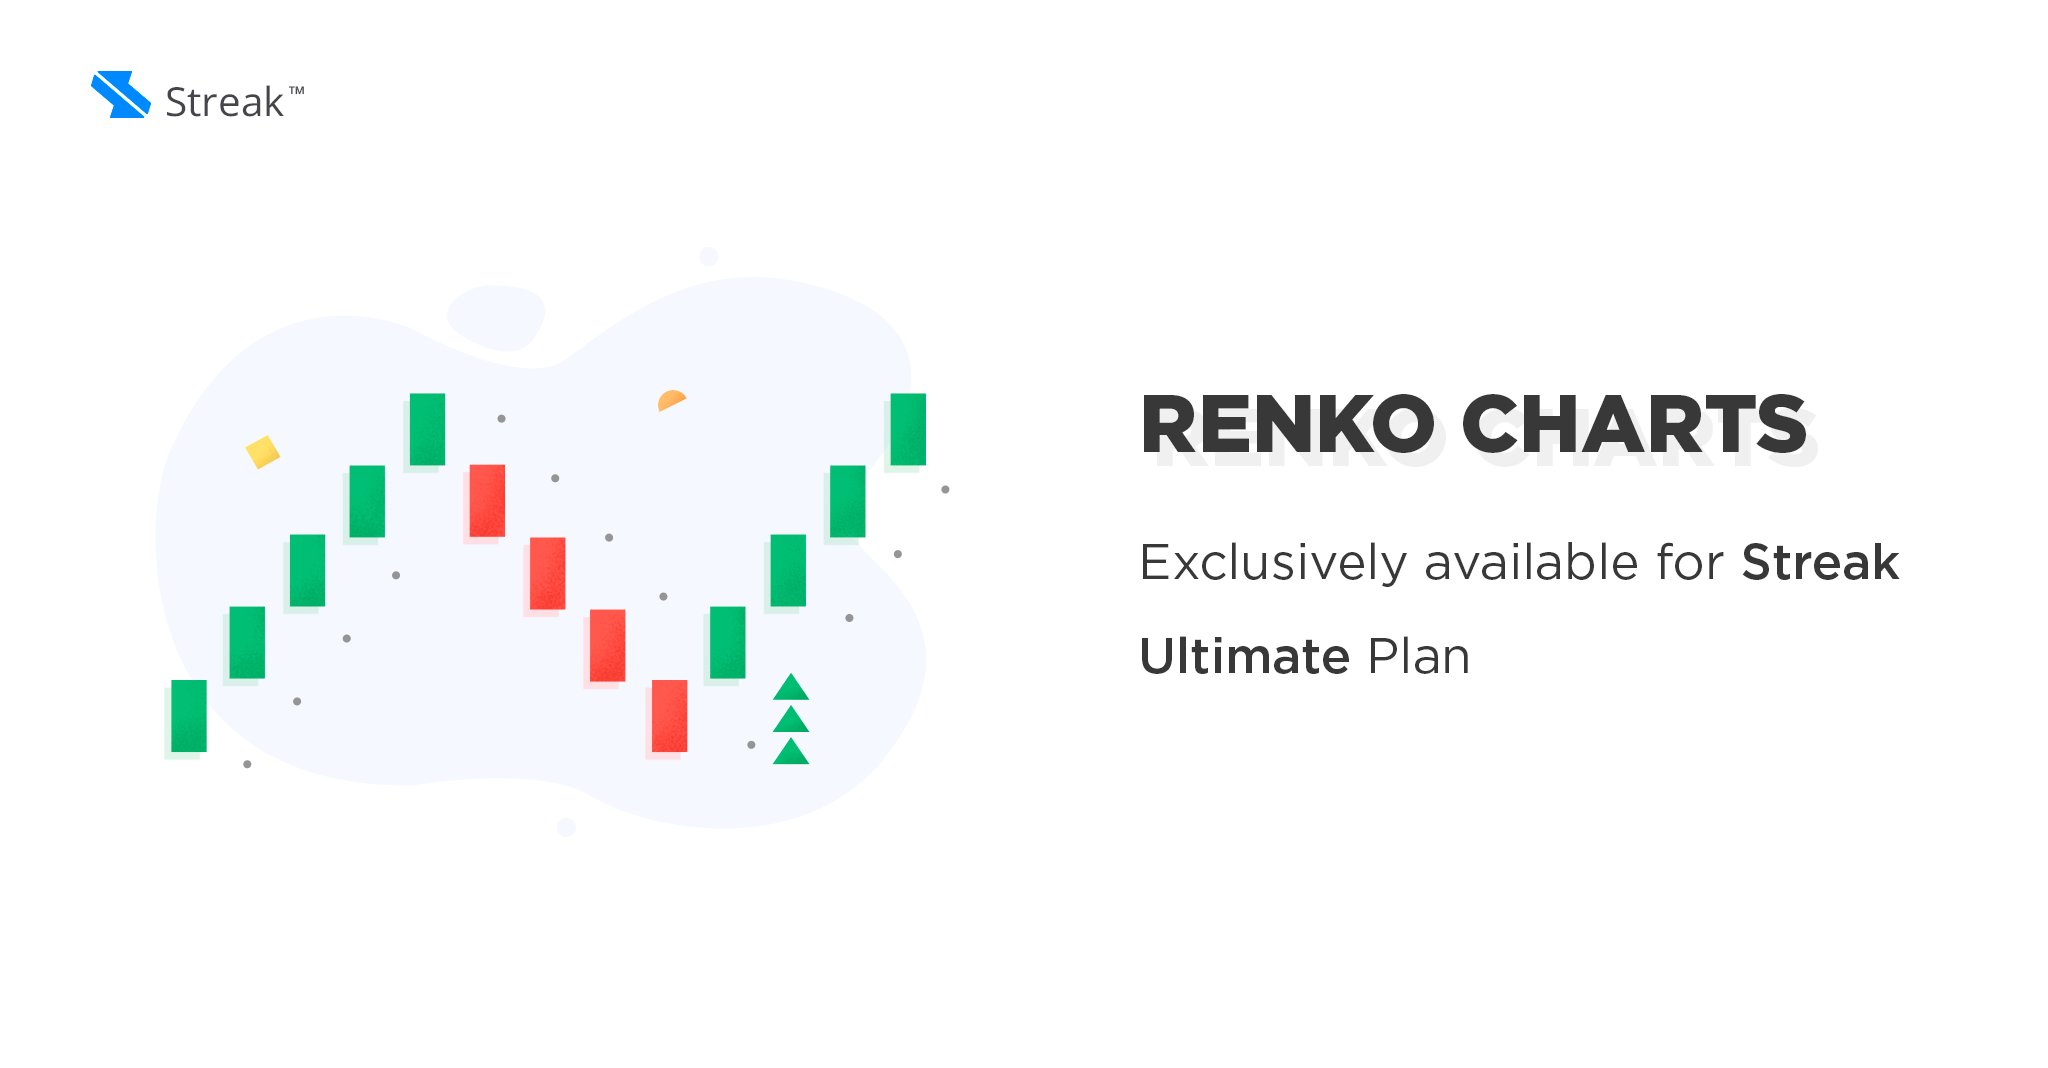 How To Backtest Renko Charts